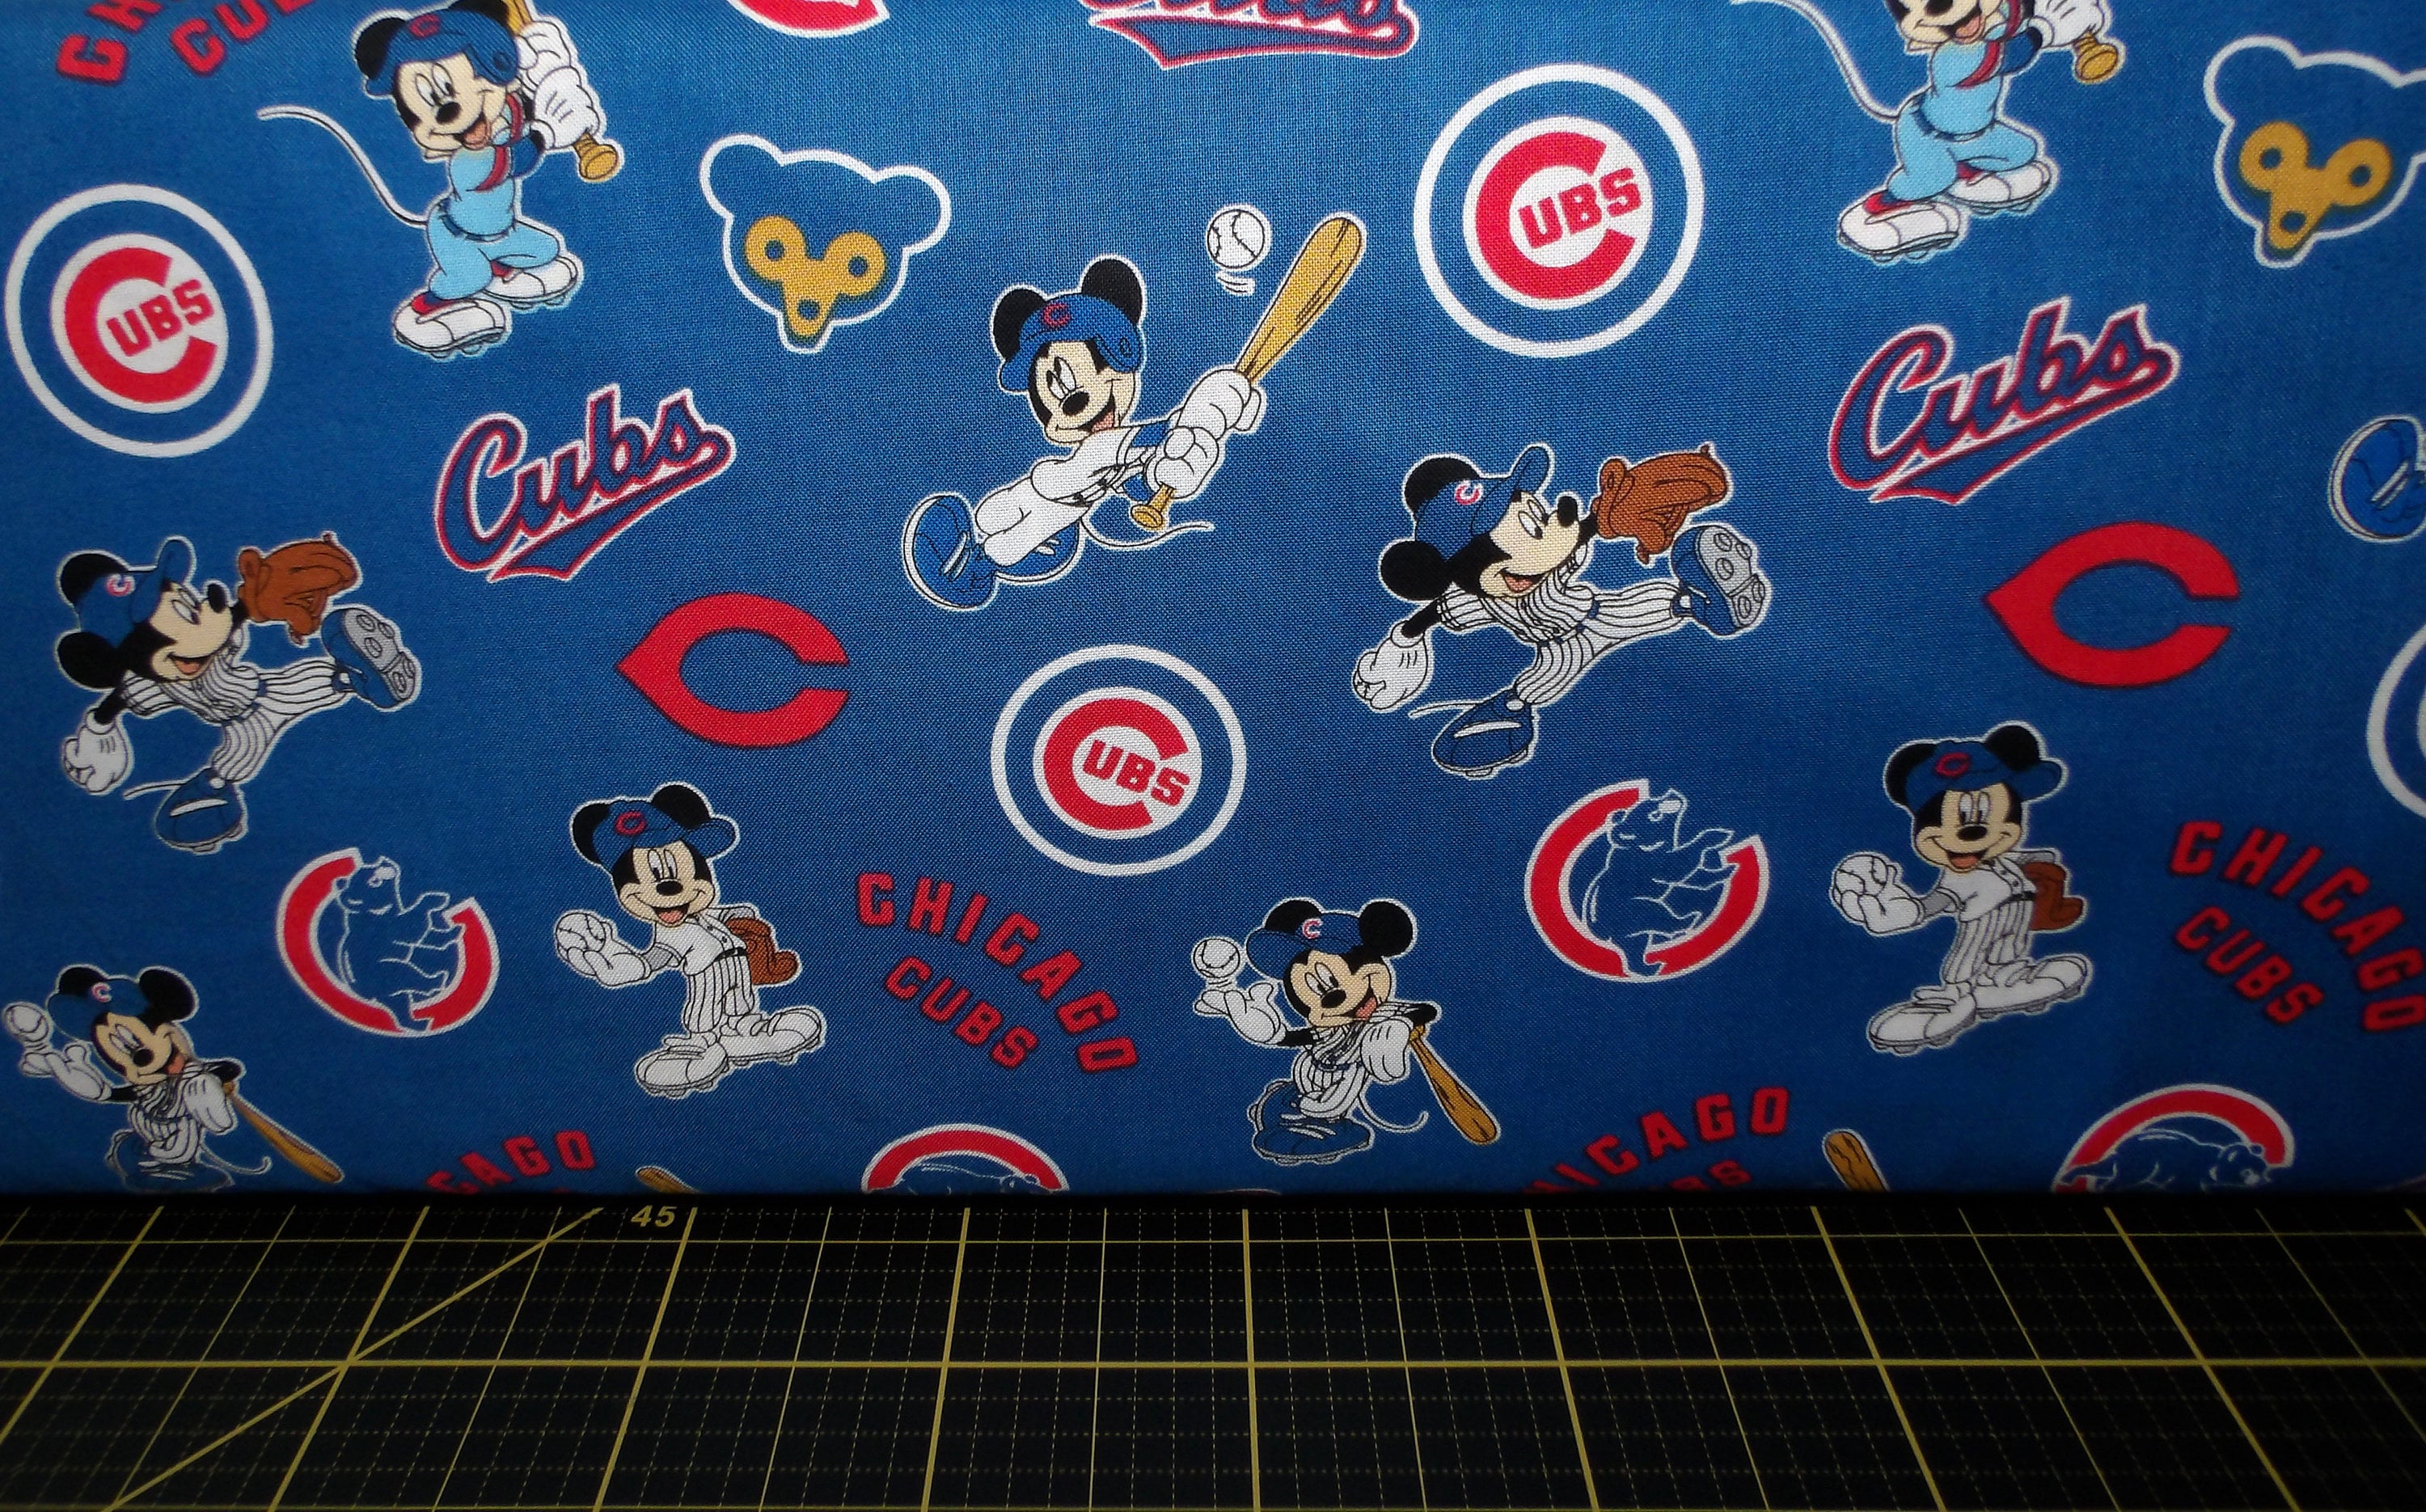 Chicago Sports Mashup Embroidery ⋆ 4 sizes included - Blu Cat Red Dog